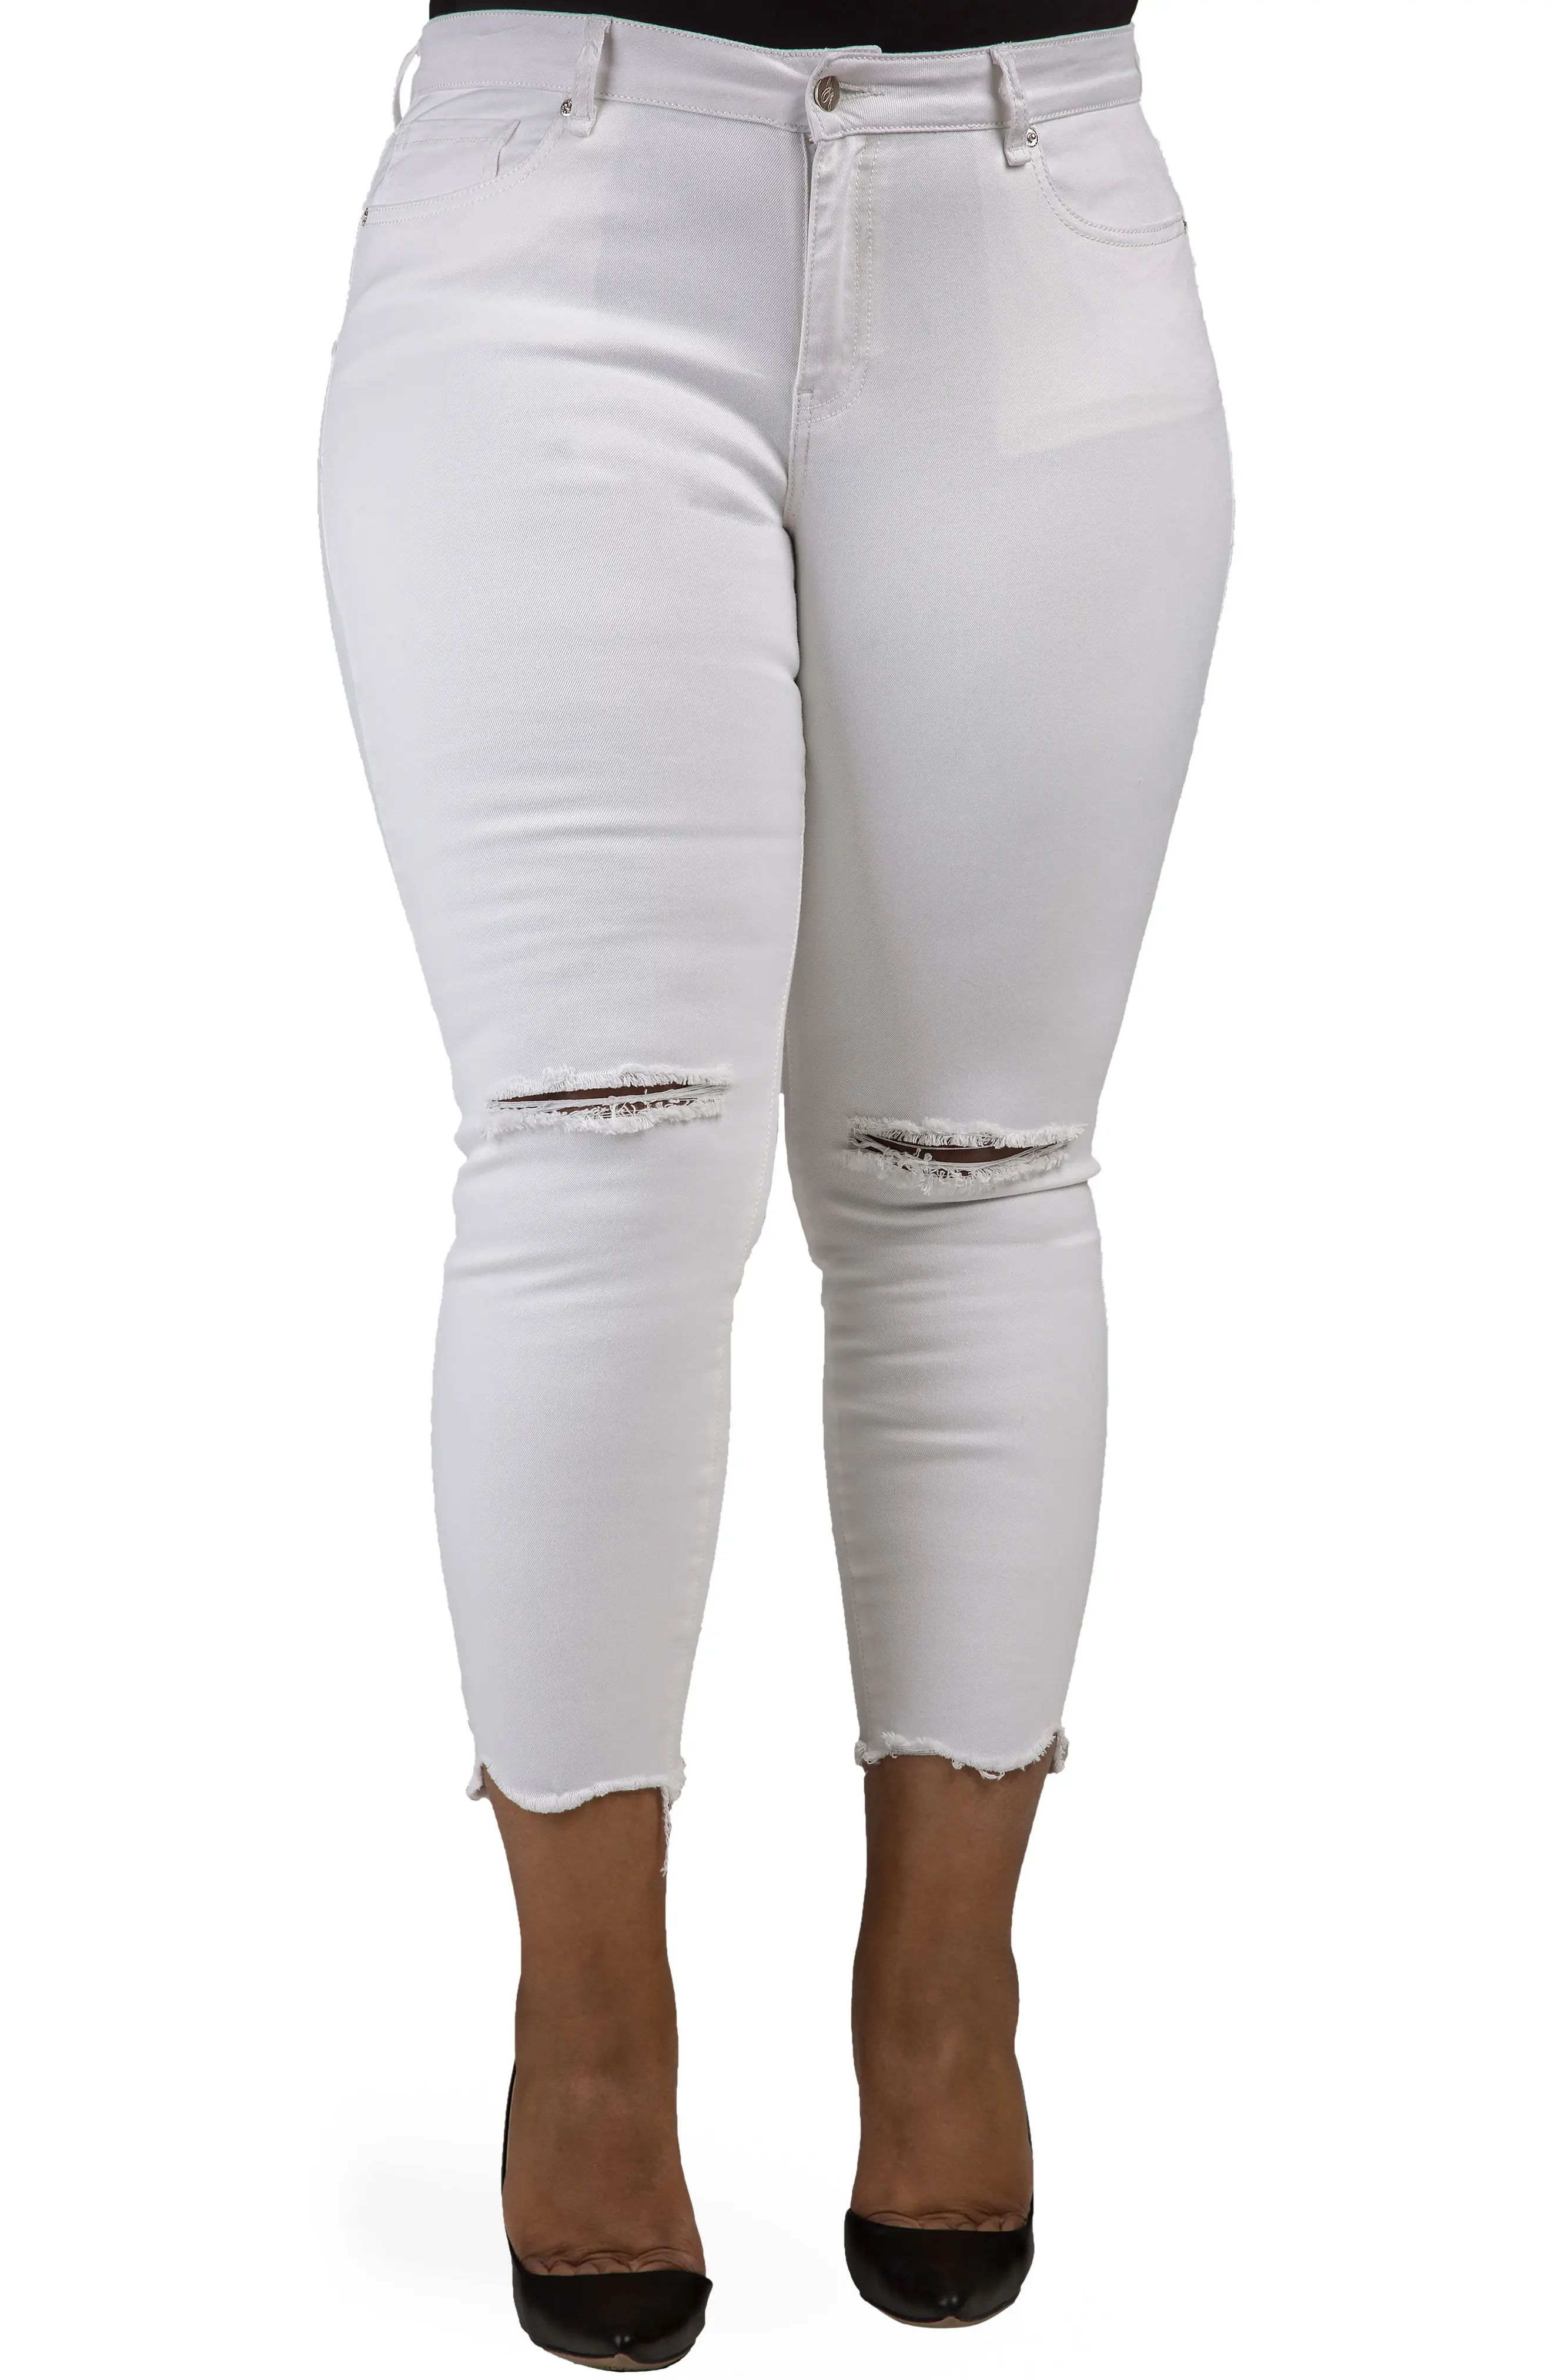 Plus Size Women's Poetic Justice Ripped Jagged Hem Ankle Jeans, Size 14W - White | Nordstrom